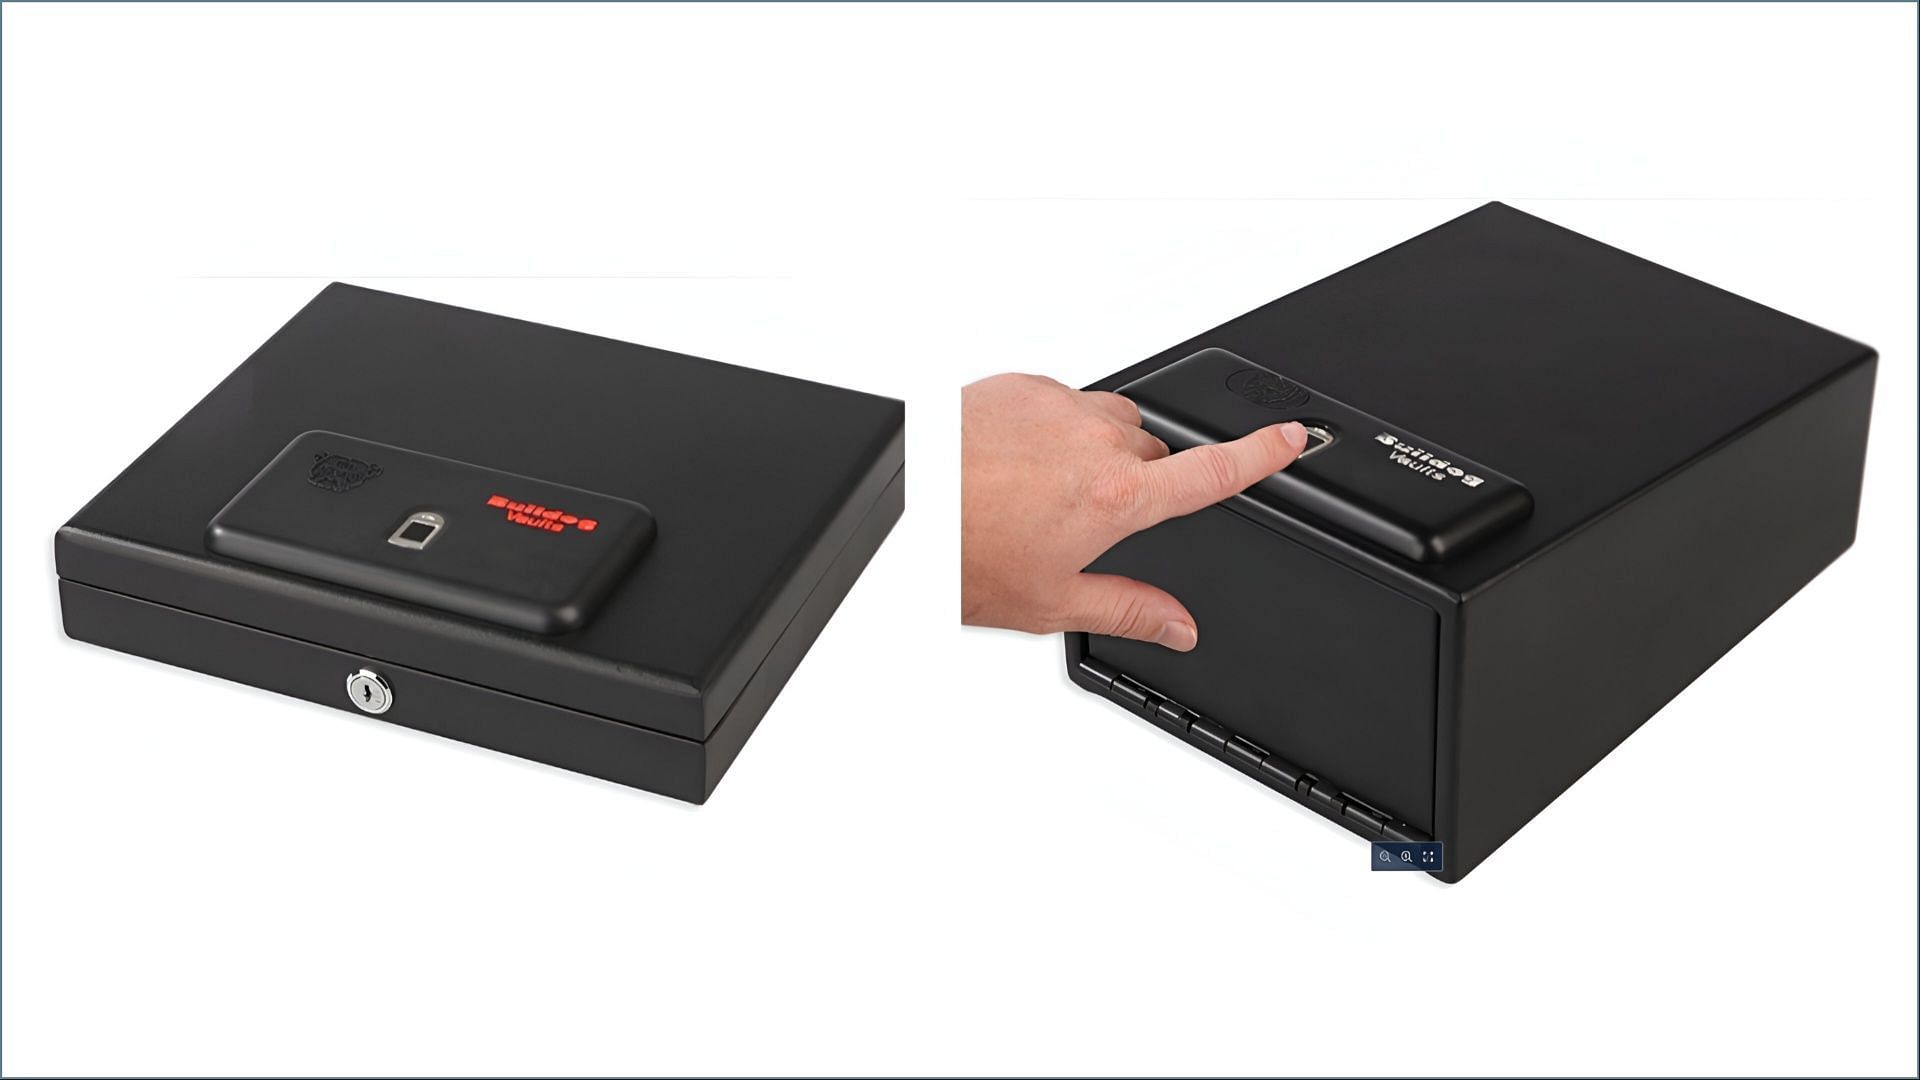 The affected gun safes were priced between $98 to $400 (Image via CPSC)